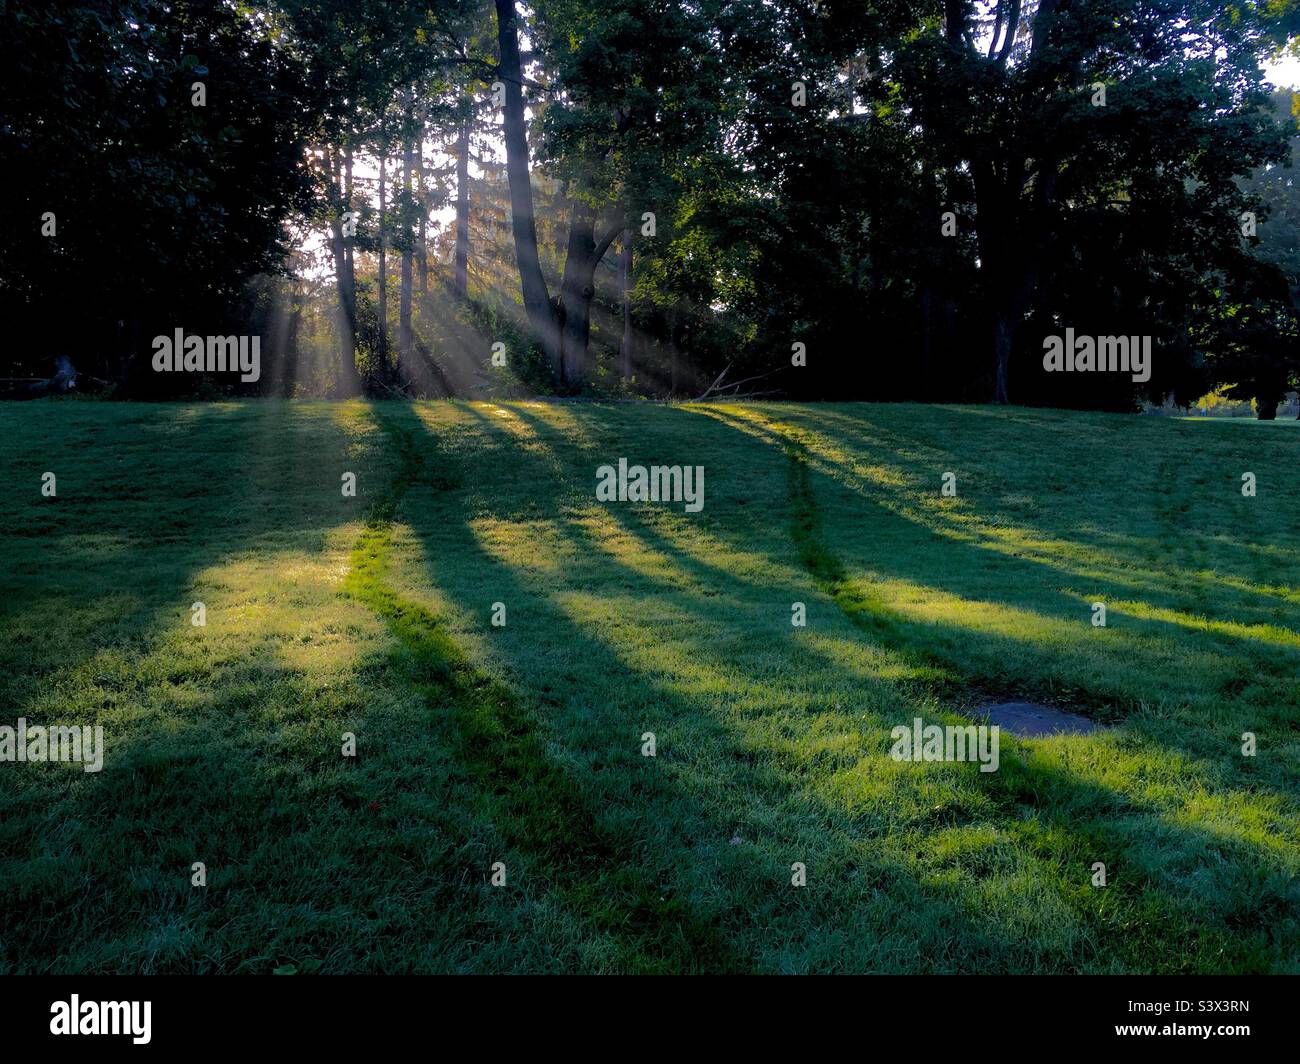 Shafts of light through the trees shine on the green grass. Morning shows the day. Perfect spot for meditation, self-reflection, shin-rin yoku. Stock Photo